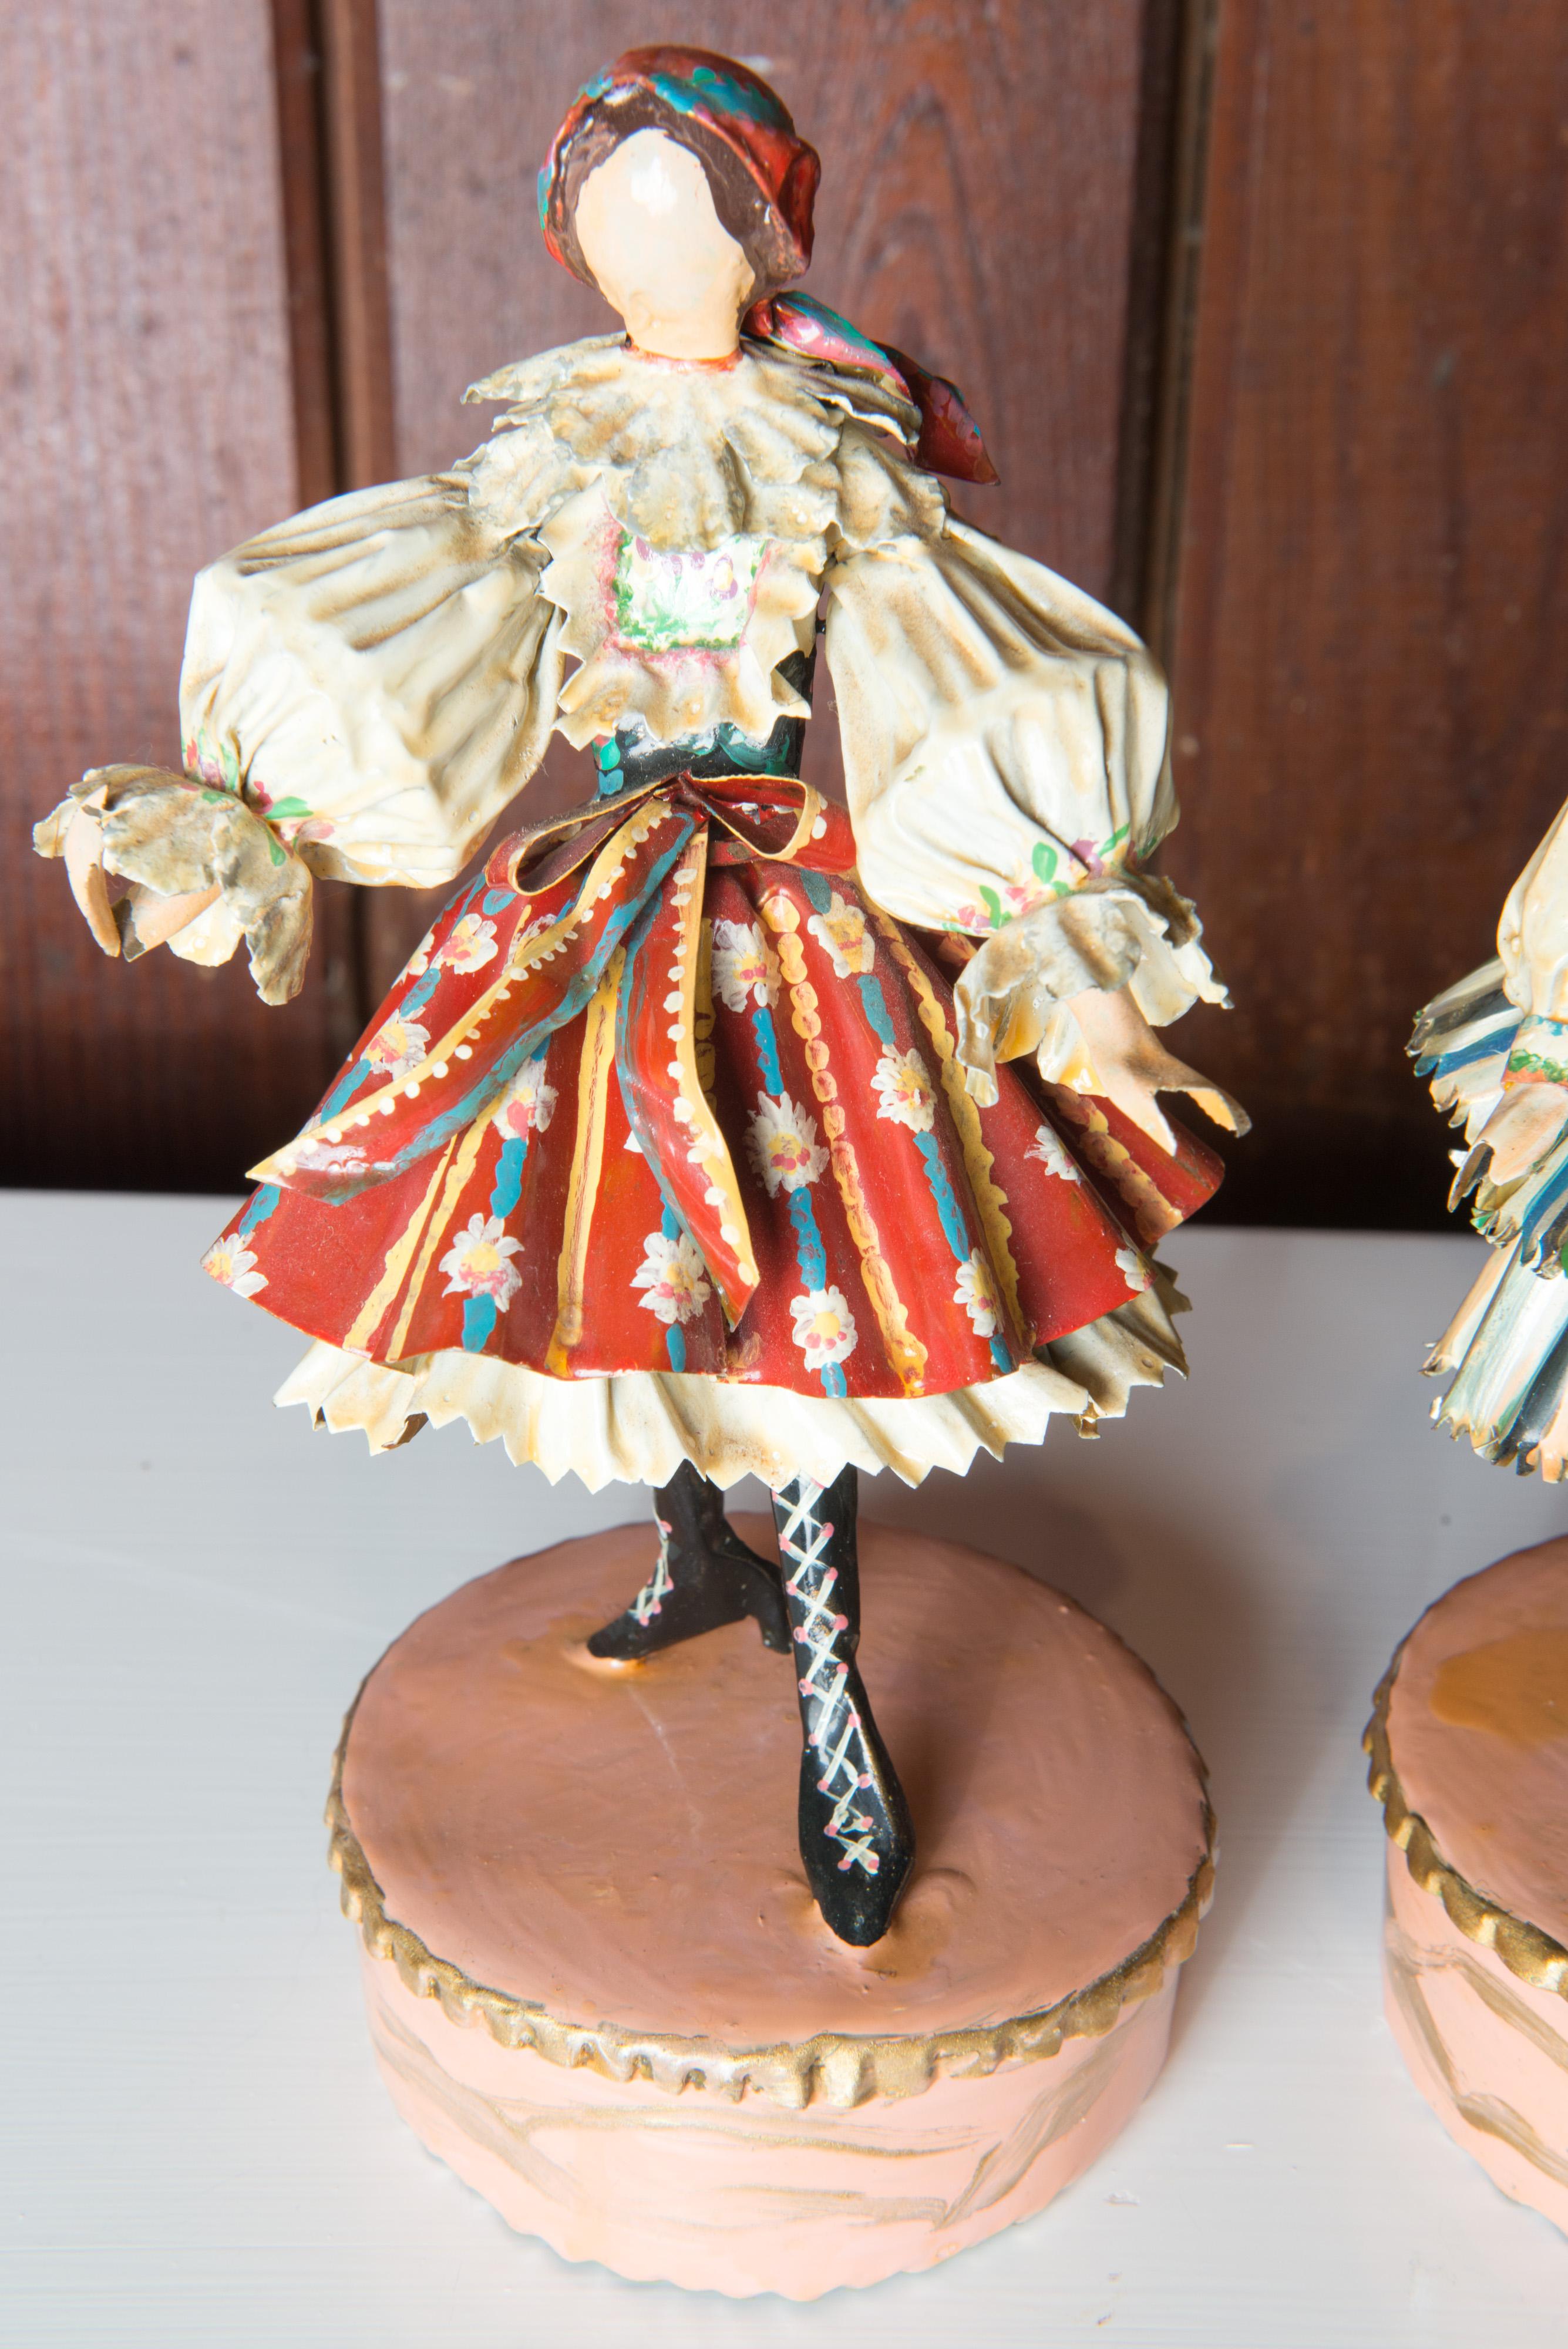 Late 20th Century Pair of Czech & Polish Costumed Sculptures by Lee Menichetti For Sale